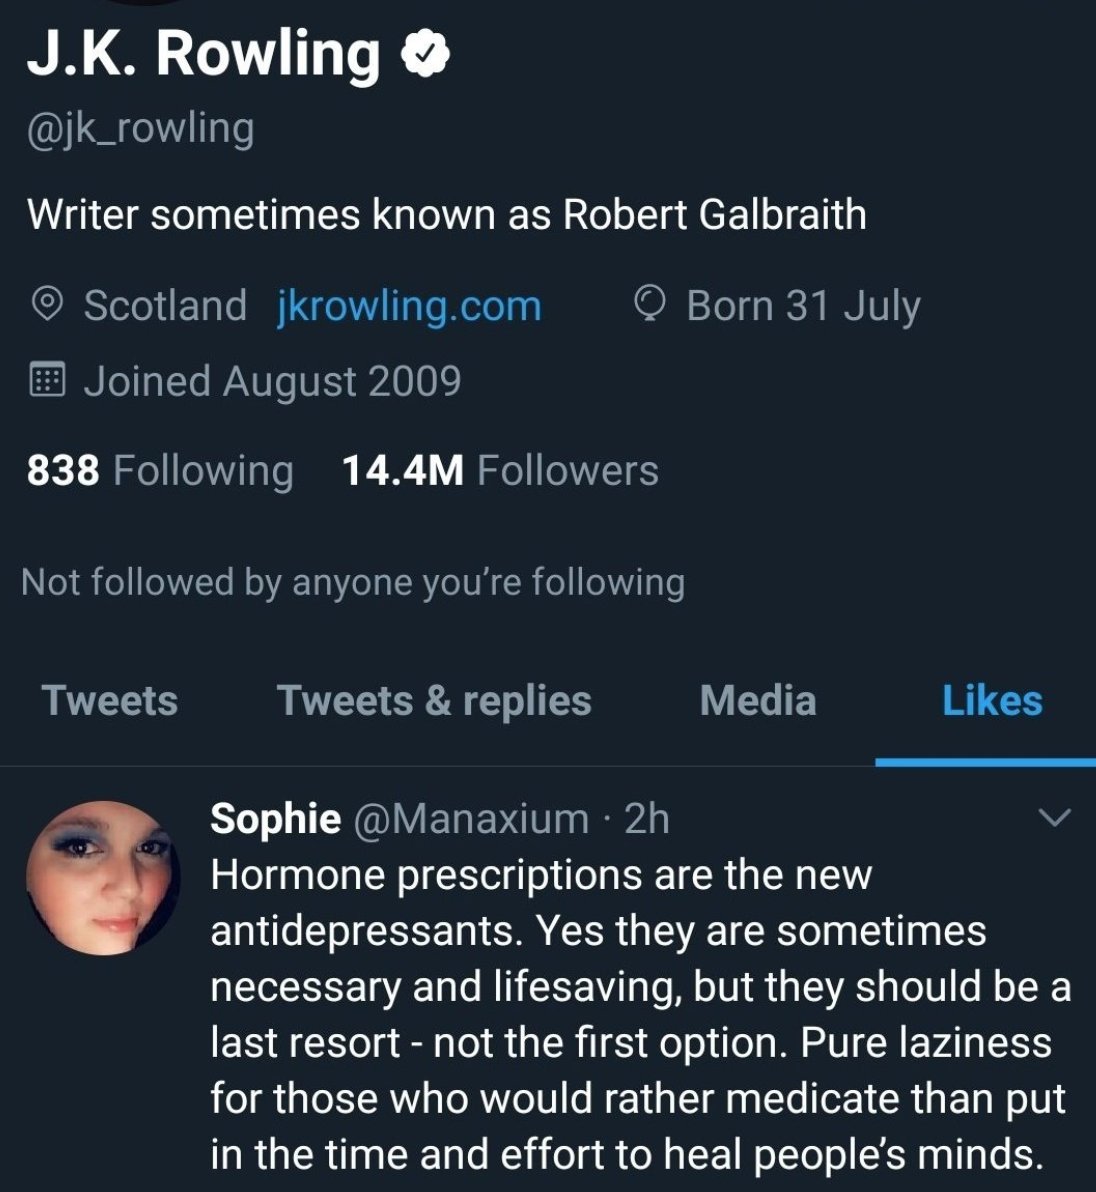 7/35 - Now onto the thread that followed.To give Rowling *maximum* benefit of the doubt (which she does not deserve) the tweet she liked here *could* be interpreted as calling the *doctors* "lazy" for leaping to medication when other options are better suited.